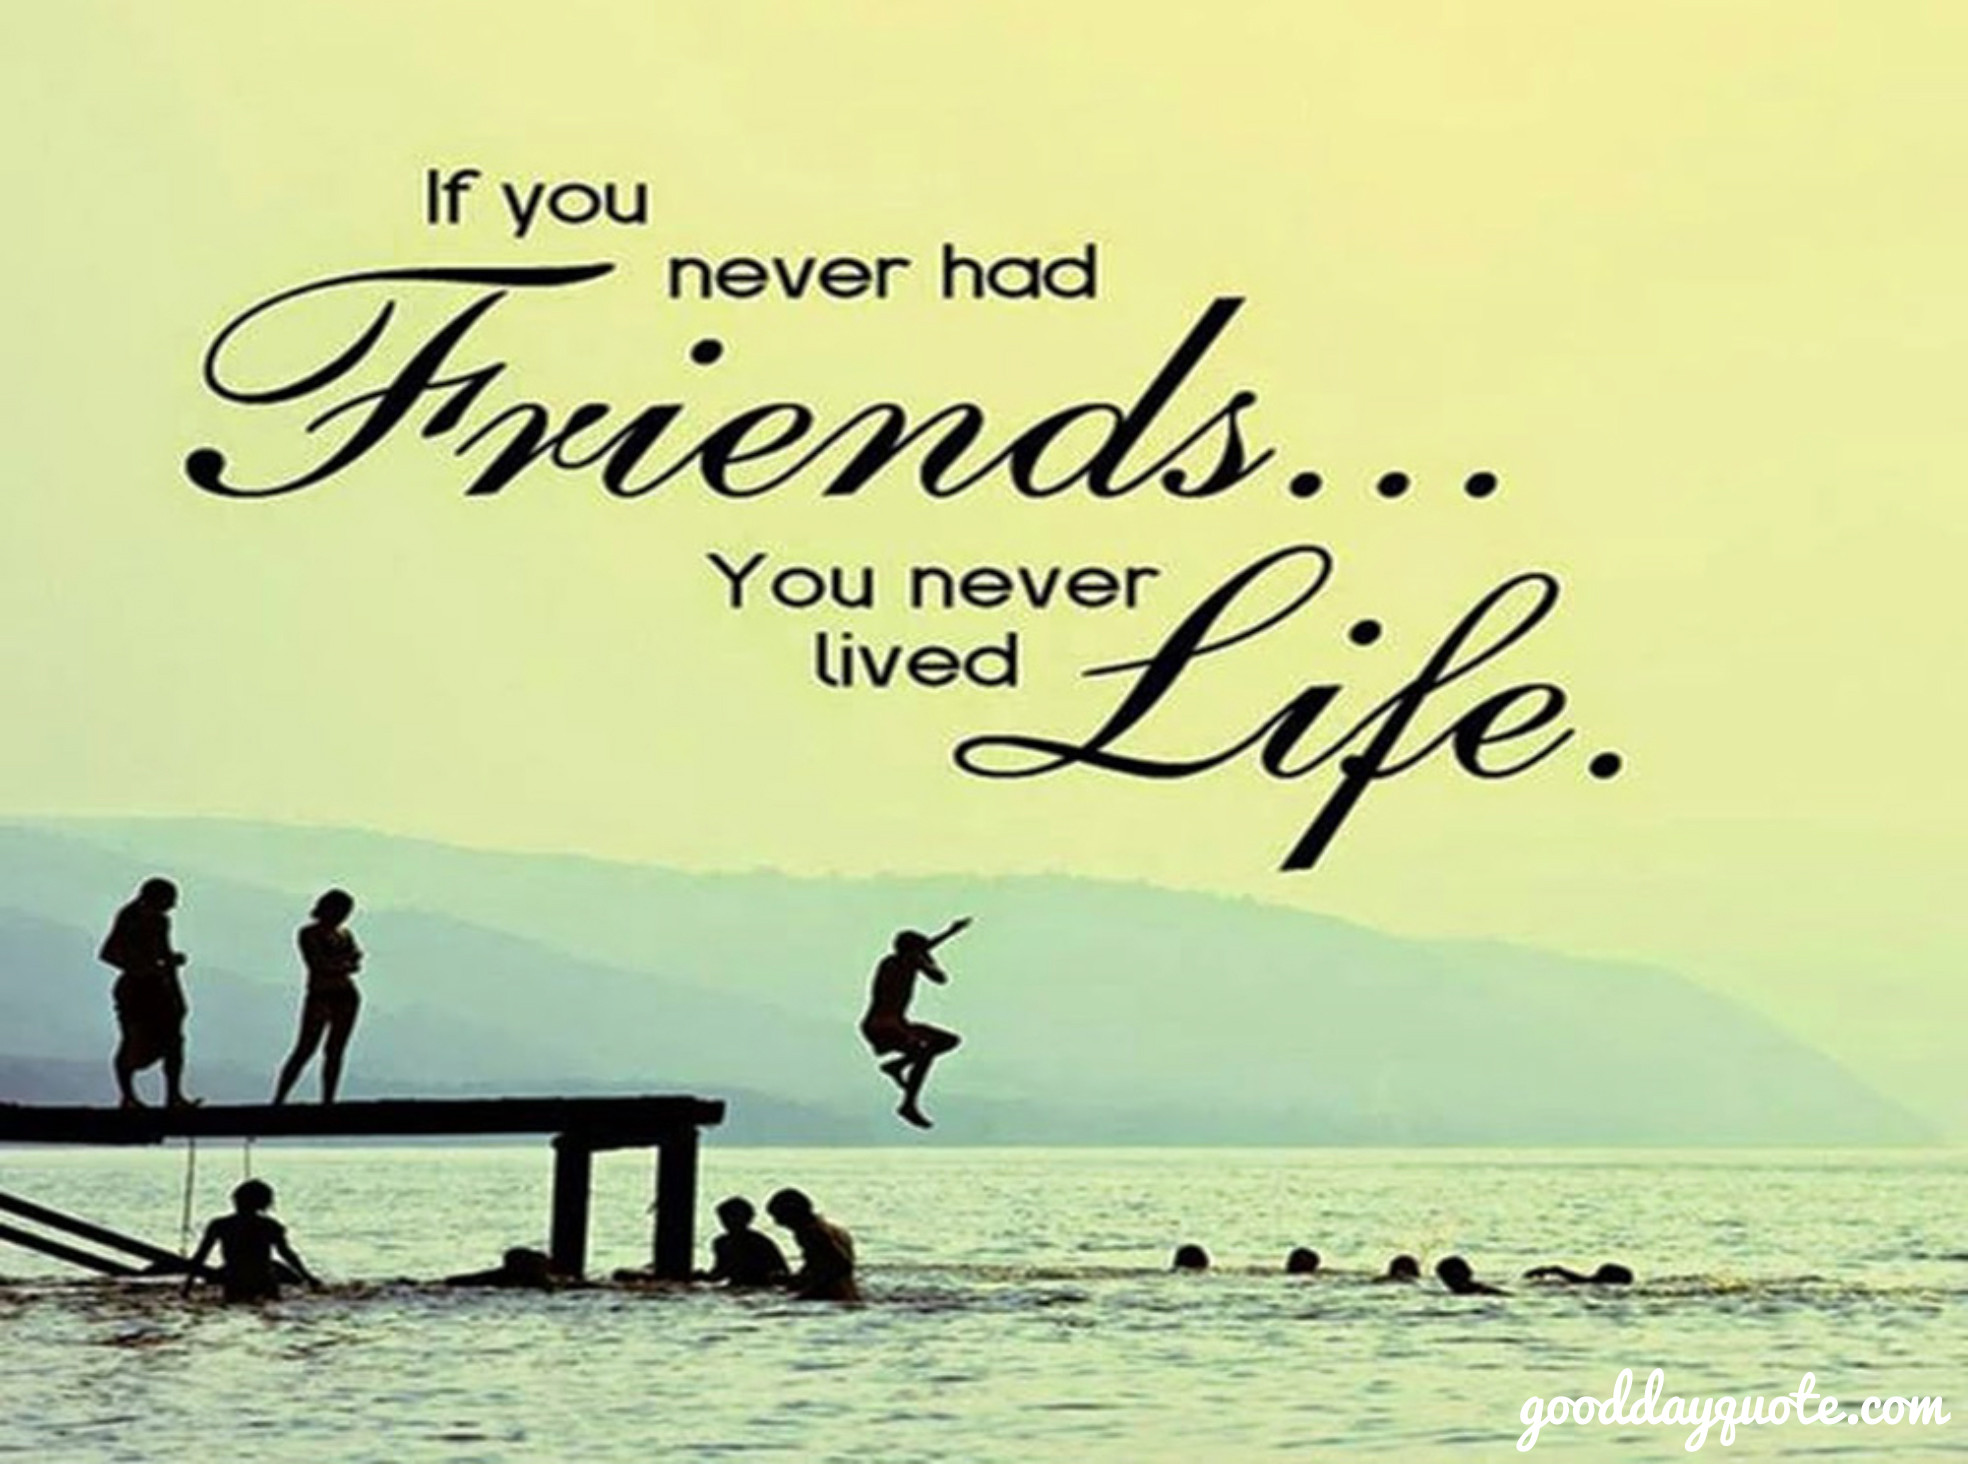 Friendship Goals Quotes
 15 Famous Quotes About Friendship Goals for BFF s